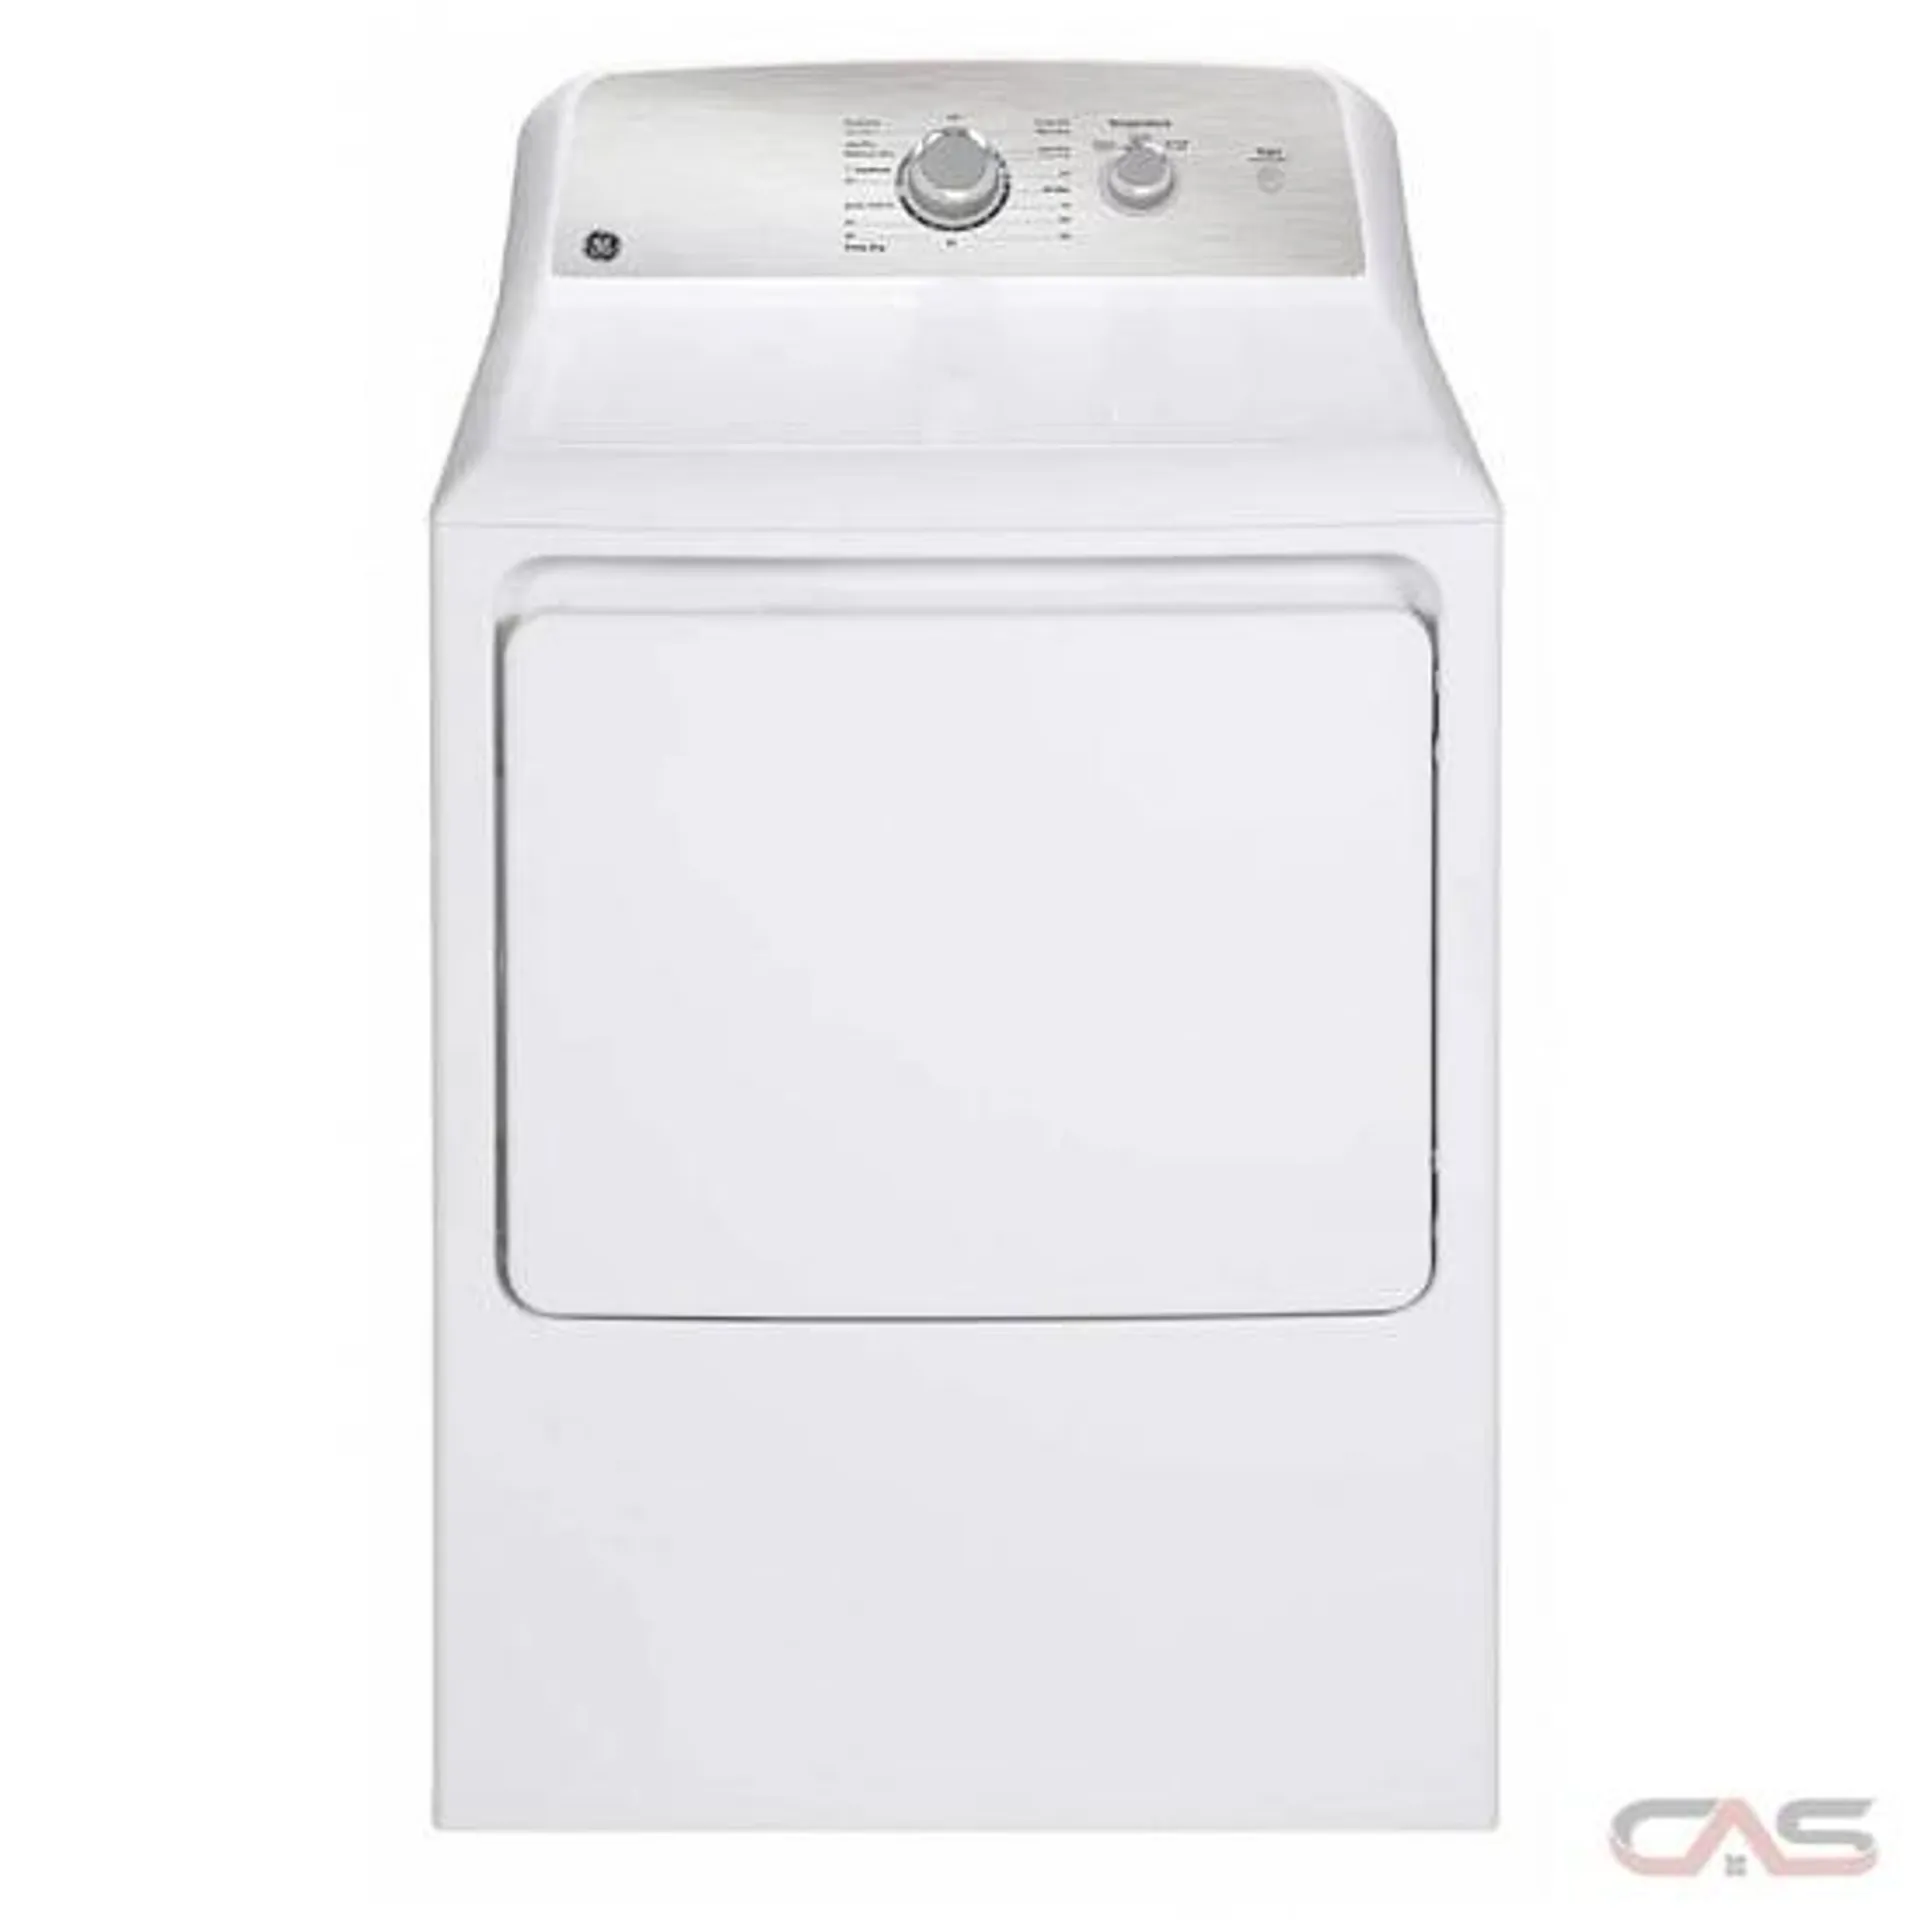 GE GTX33EBMRWS Dryer, 27 inch Width, Electric Dryer, 6.2 cu. ft. Capacity, 5 Dry Cycles, 3 Temperature Settings, Steel Drum, White colour